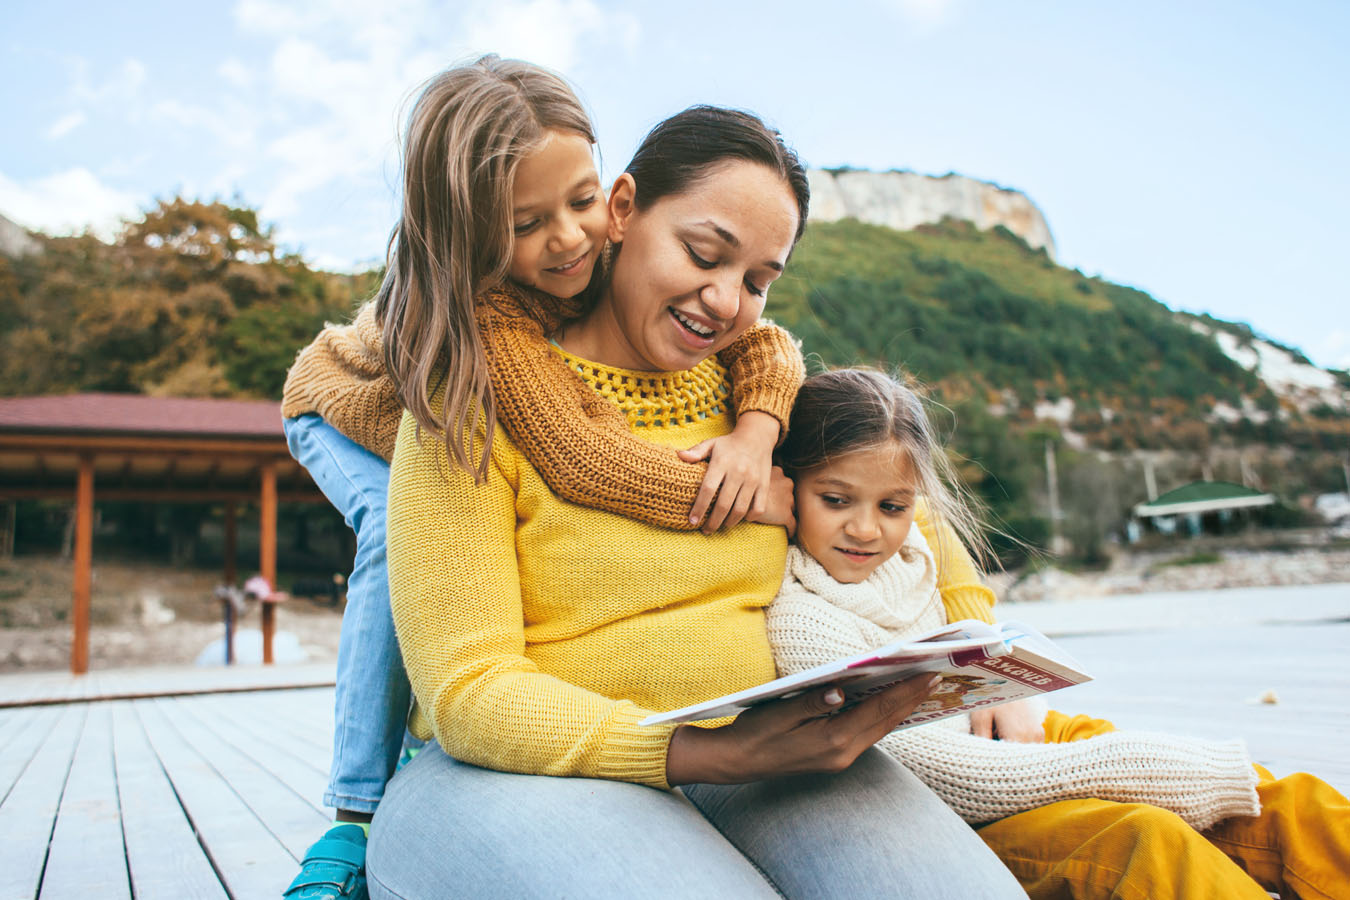 Young mother and two daughters reading a book outdoors | Therapy for women in Baltimore, MD with a women's therapist | Counseling for women | New Connections Counseling Center | Baltimore, MD" width="300" height="200"